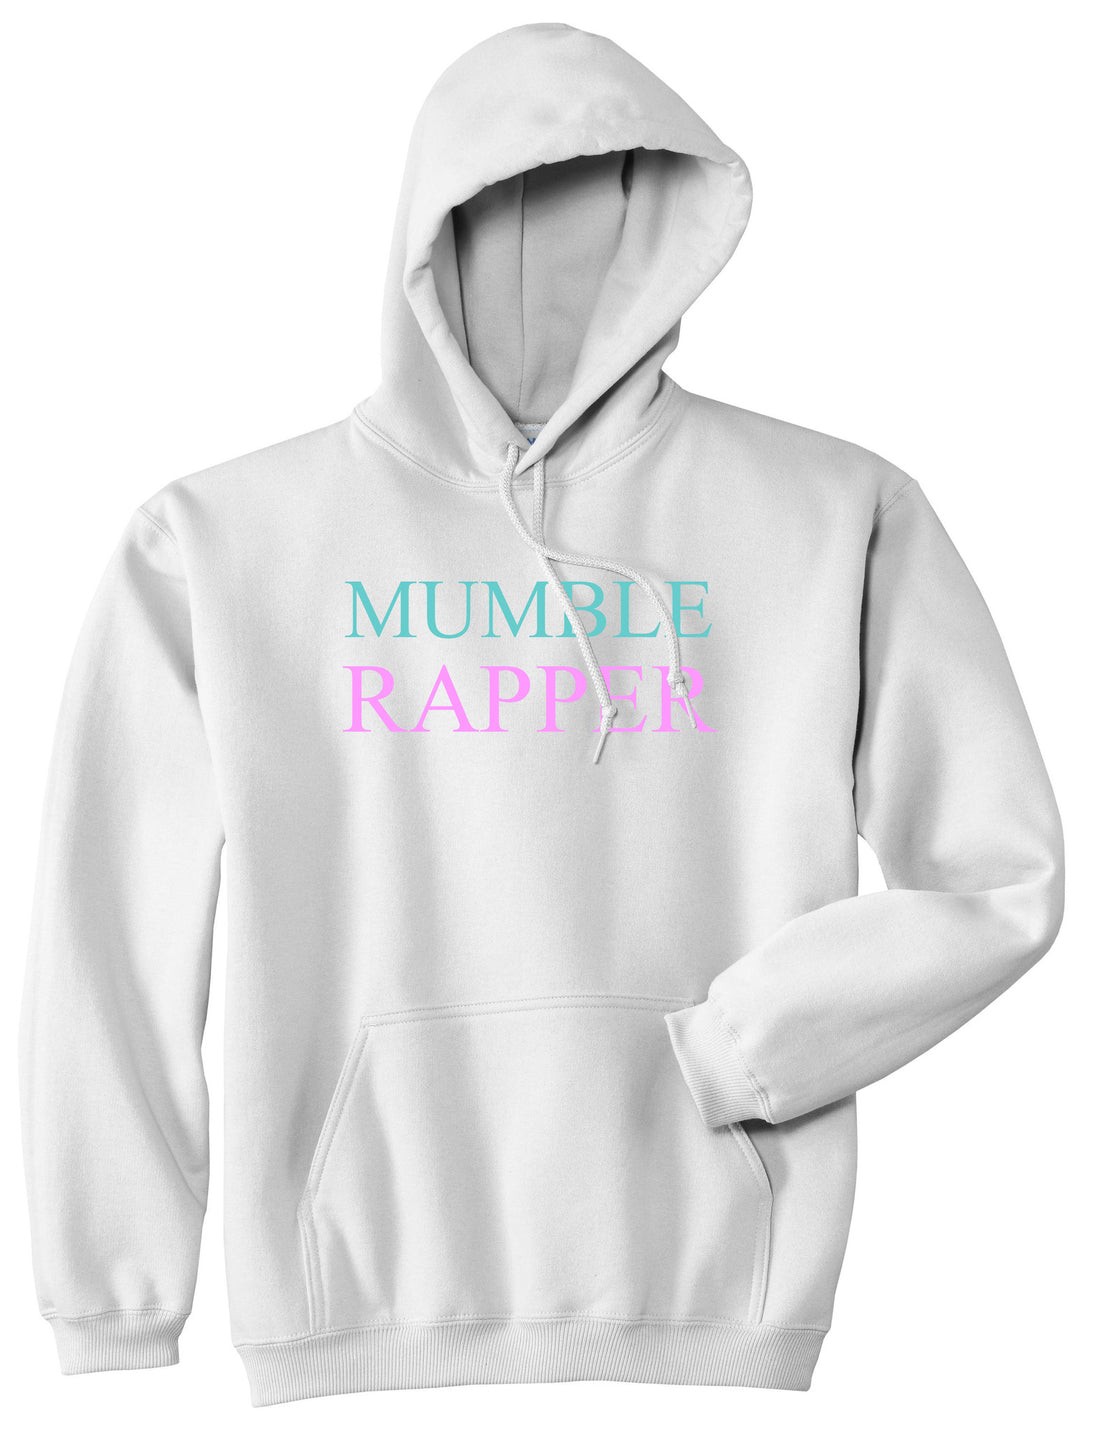 Mumble Rapper Pullover Hoodie in White